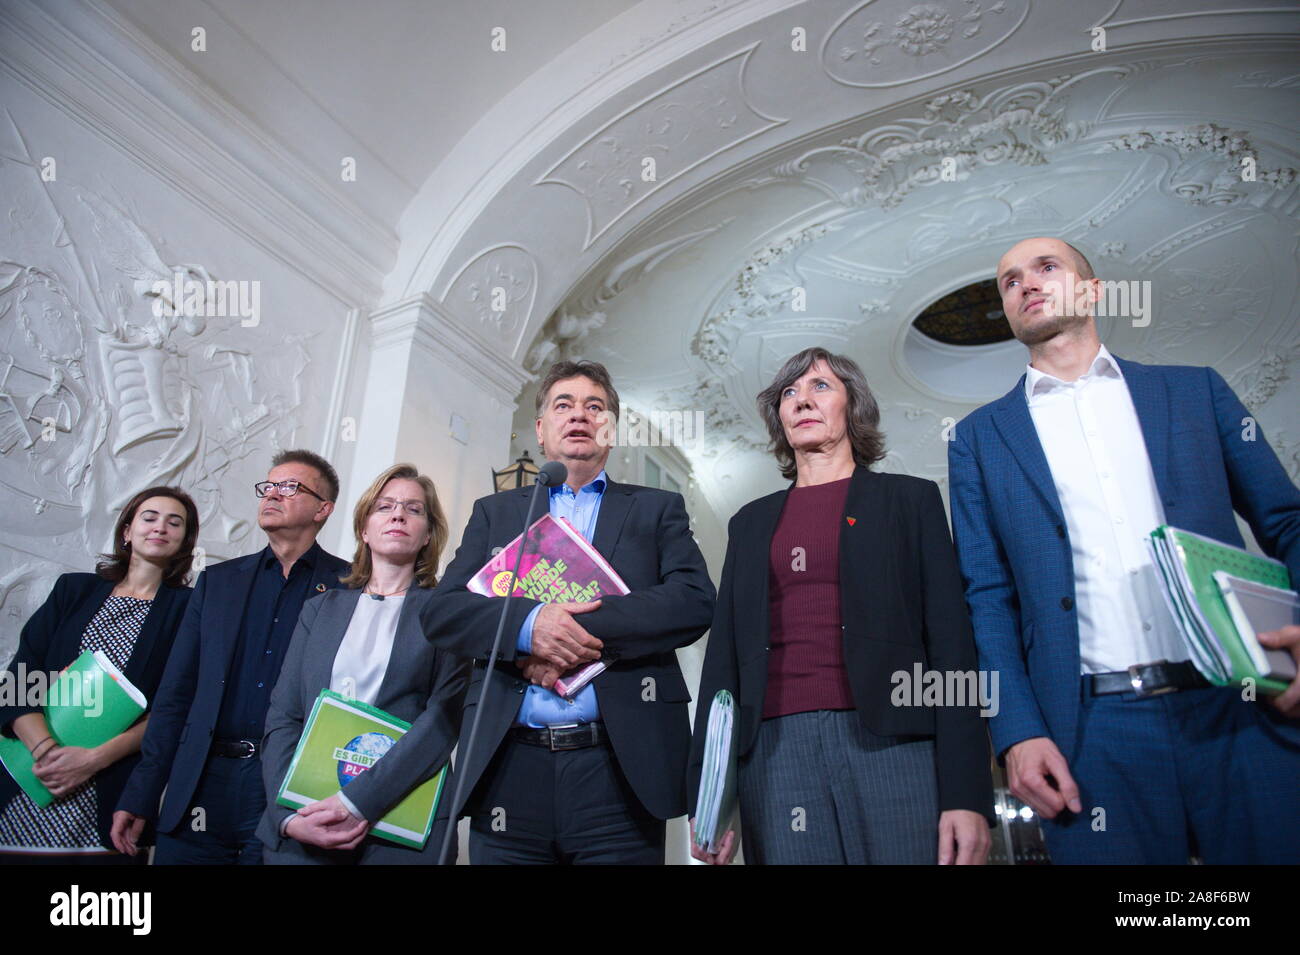 Vienna, Austria. 08th November, 2019. Chairman and national spokesman of the Green Party (center) Werner Kogler and his Team on the occasion of an exploratory talk to evaluate possibilities for coalition building by ÖVP and the Green Party at Winterpalais Prinz Eugen, Himmelpfortgasse 8 on November 5, 2019 in Vienna. Picture shows( from L to R) Alma Zadic, Rudi Anschober, Leonore Gewessler, Werner Kogler, Birgit Hebein and Josef Meichenitsch. Credit: Franz Perc/Alamy Live News Stock Photo